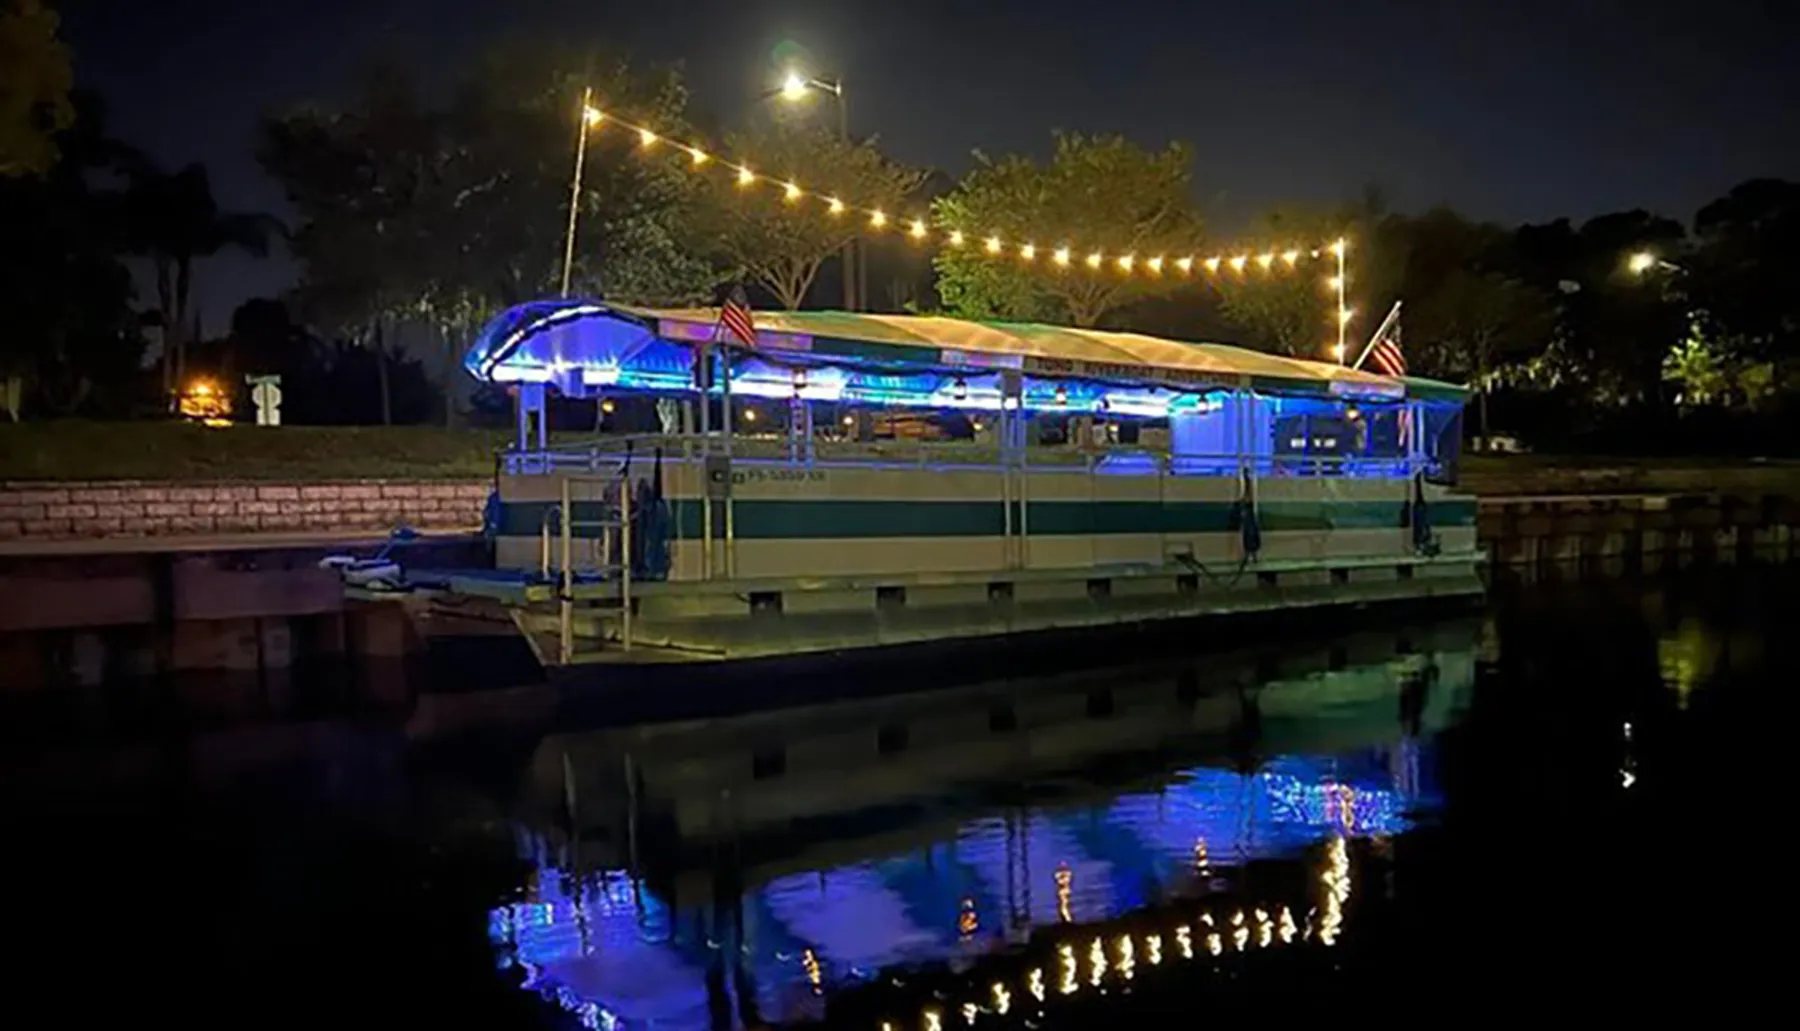 A boat decorated with lights is moored at a dock during the evening, reflecting in the water.